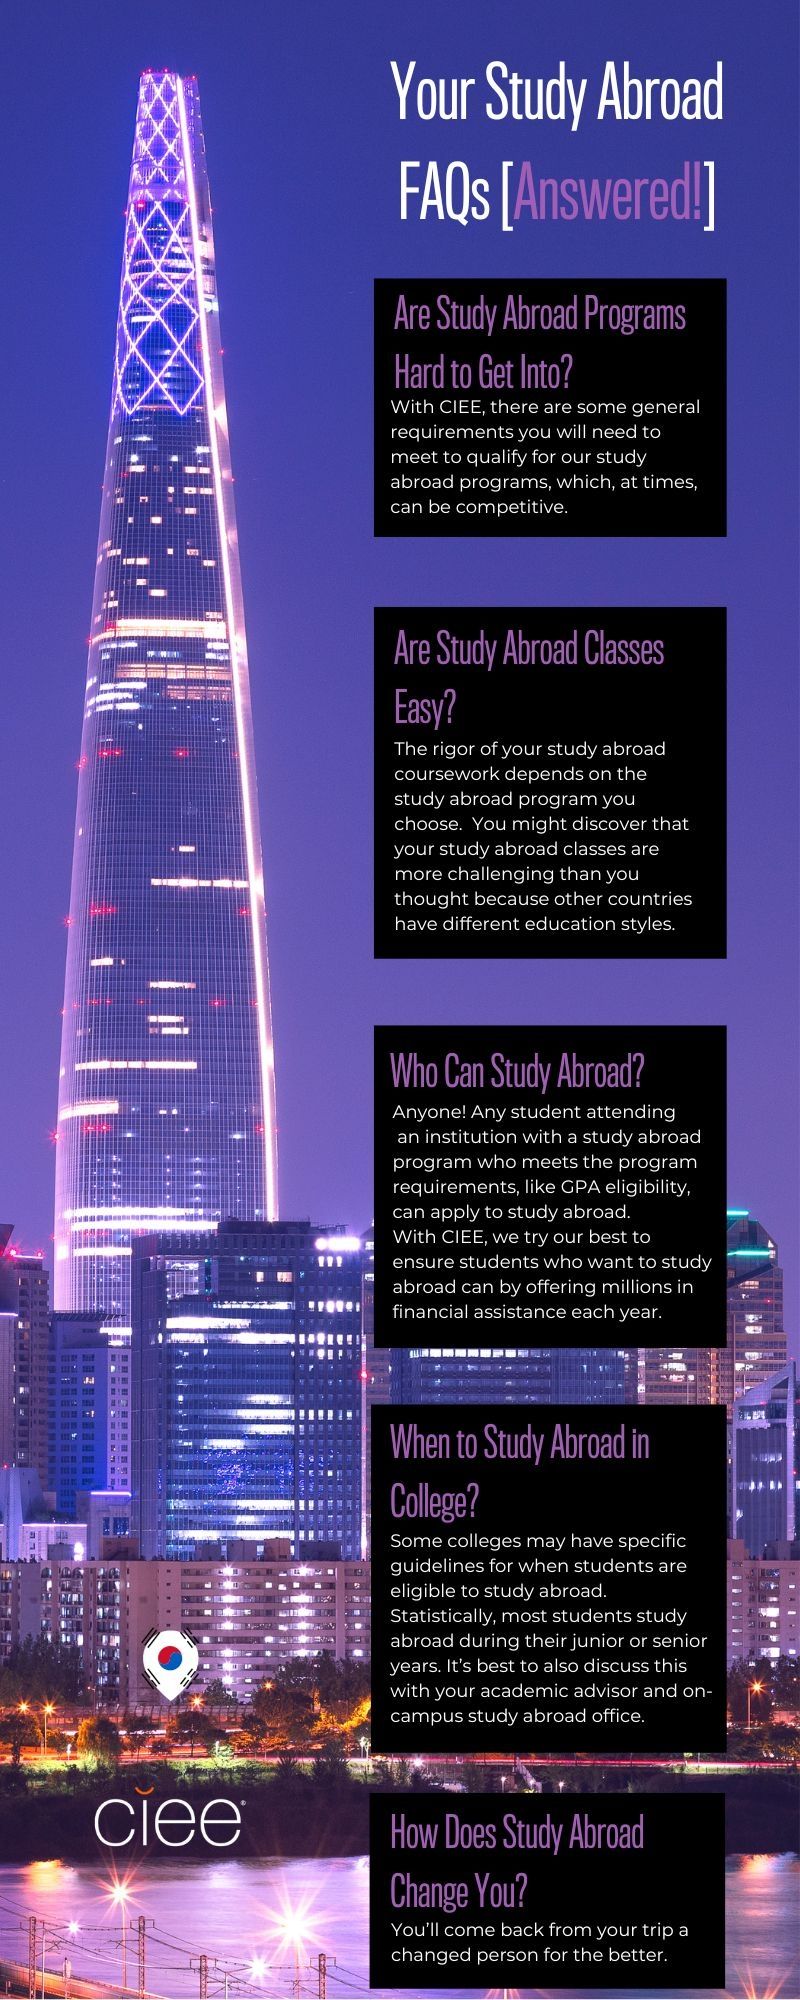 study abroad FAQs answered